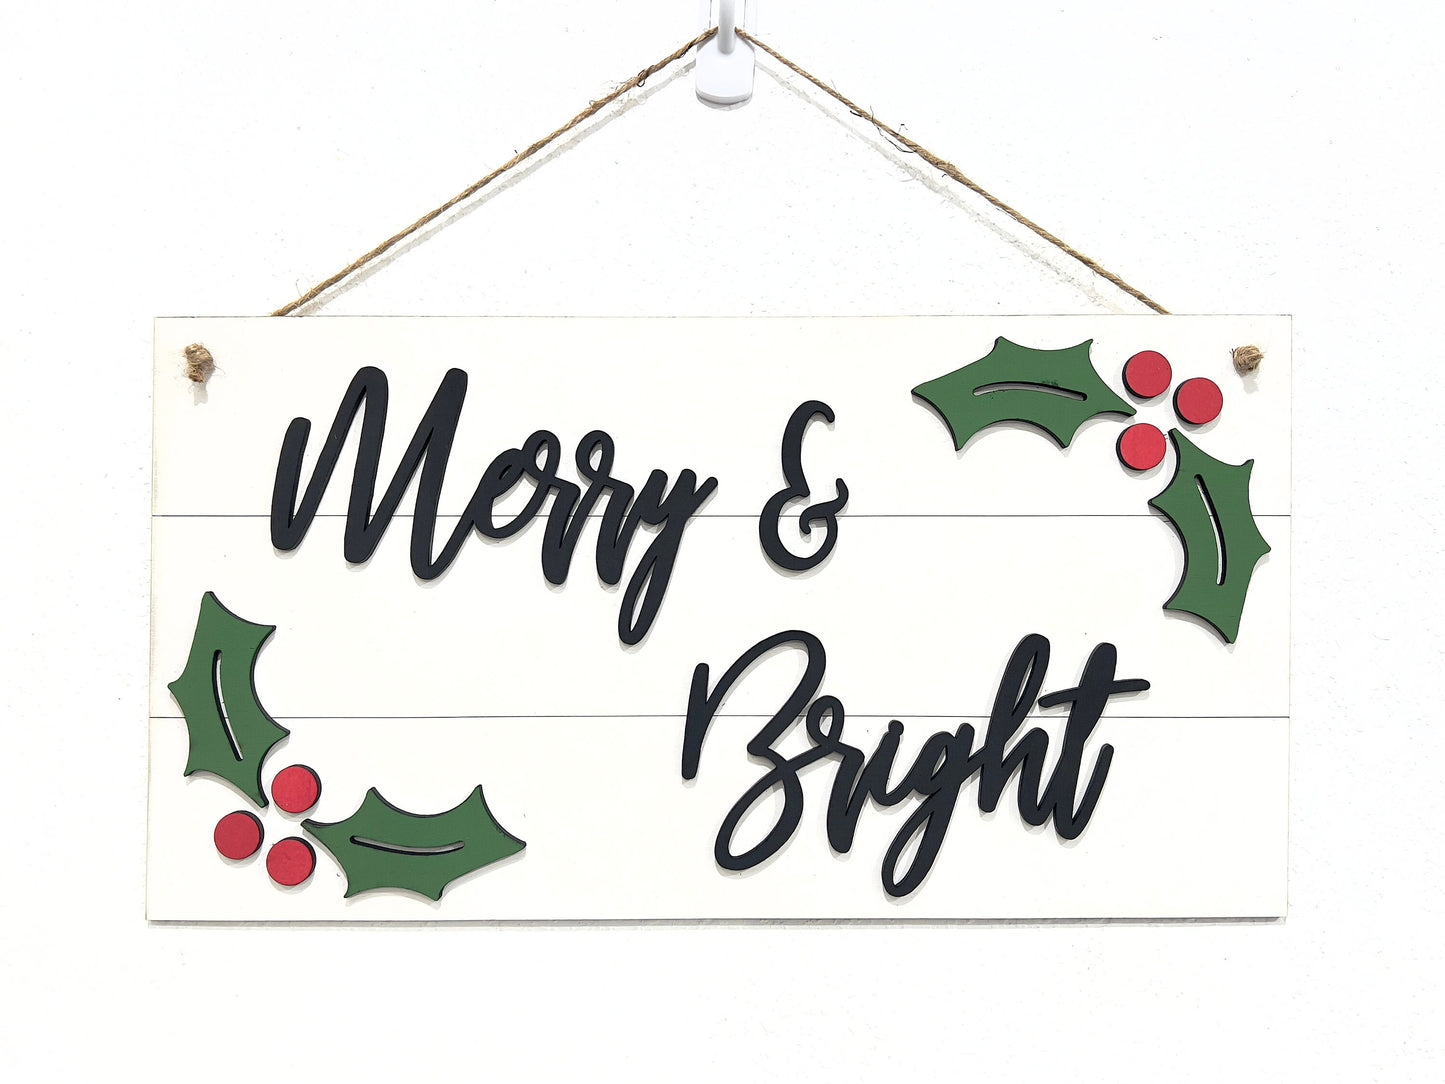 Merry & bright sign, shiplap farmhouse holiday decor, country winter signs, 3D rustic Christmas sign, Christmas wall hanging, door hanger